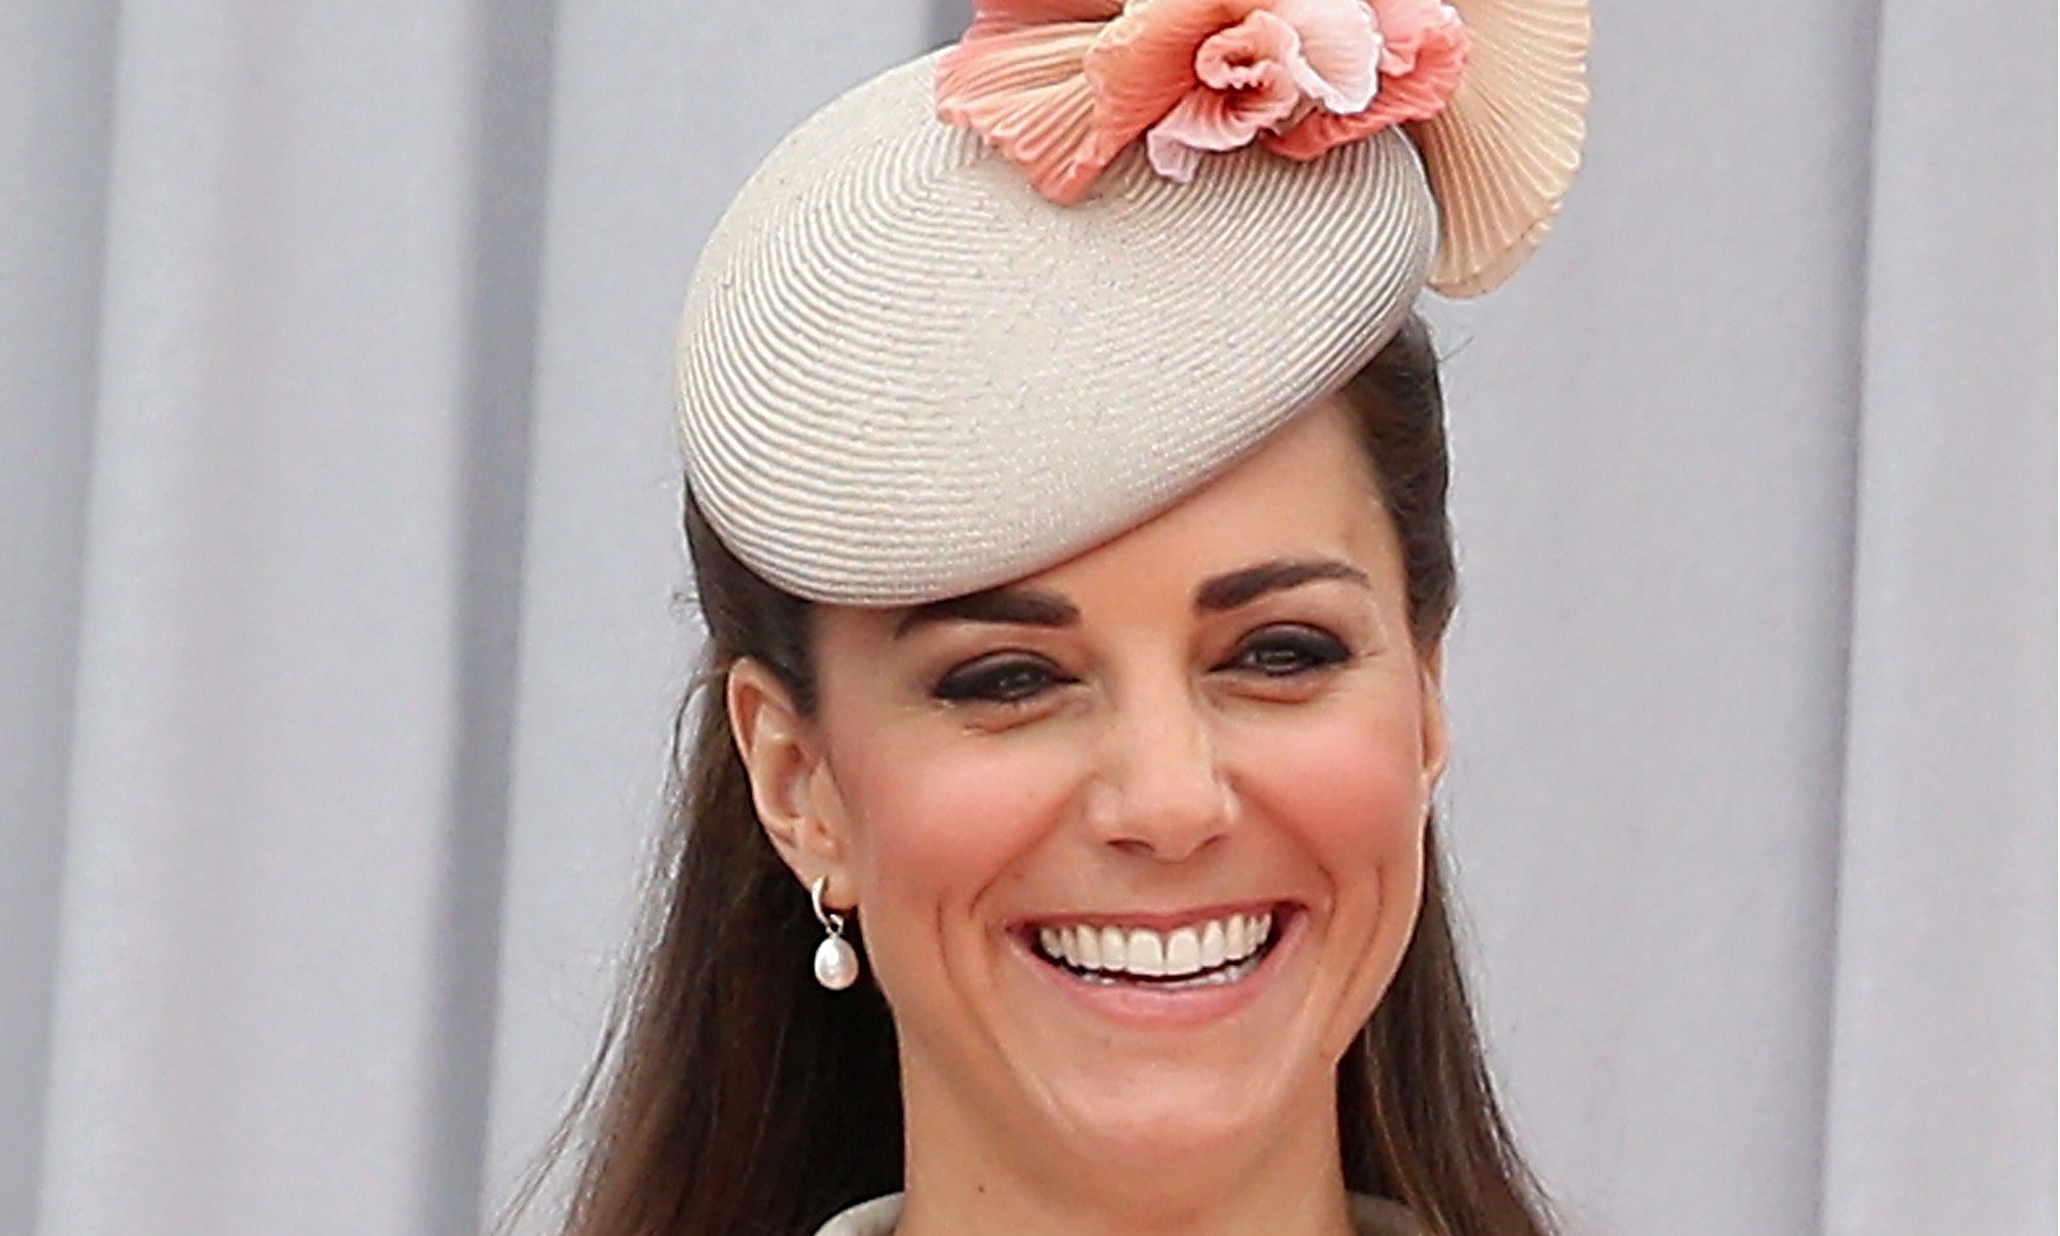 Suffragettes didn’t suffer for Kate Middleton’s right to wear a dress ...